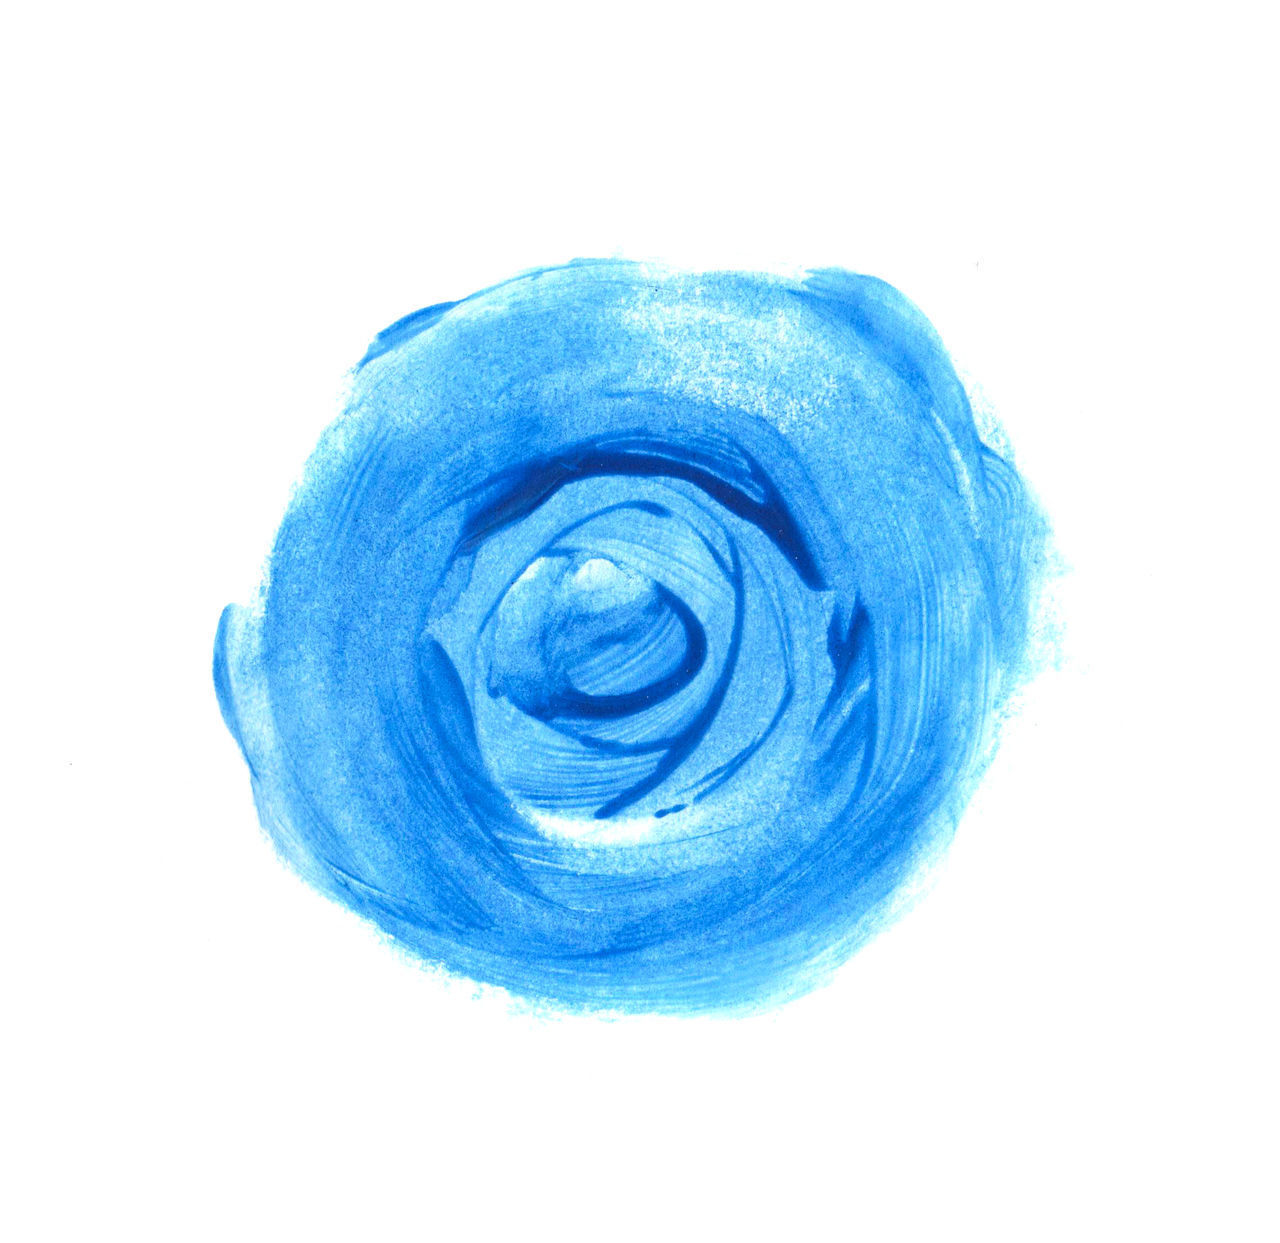 CLOSE-UP OF BLUE ART ON WHITE BACKGROUND